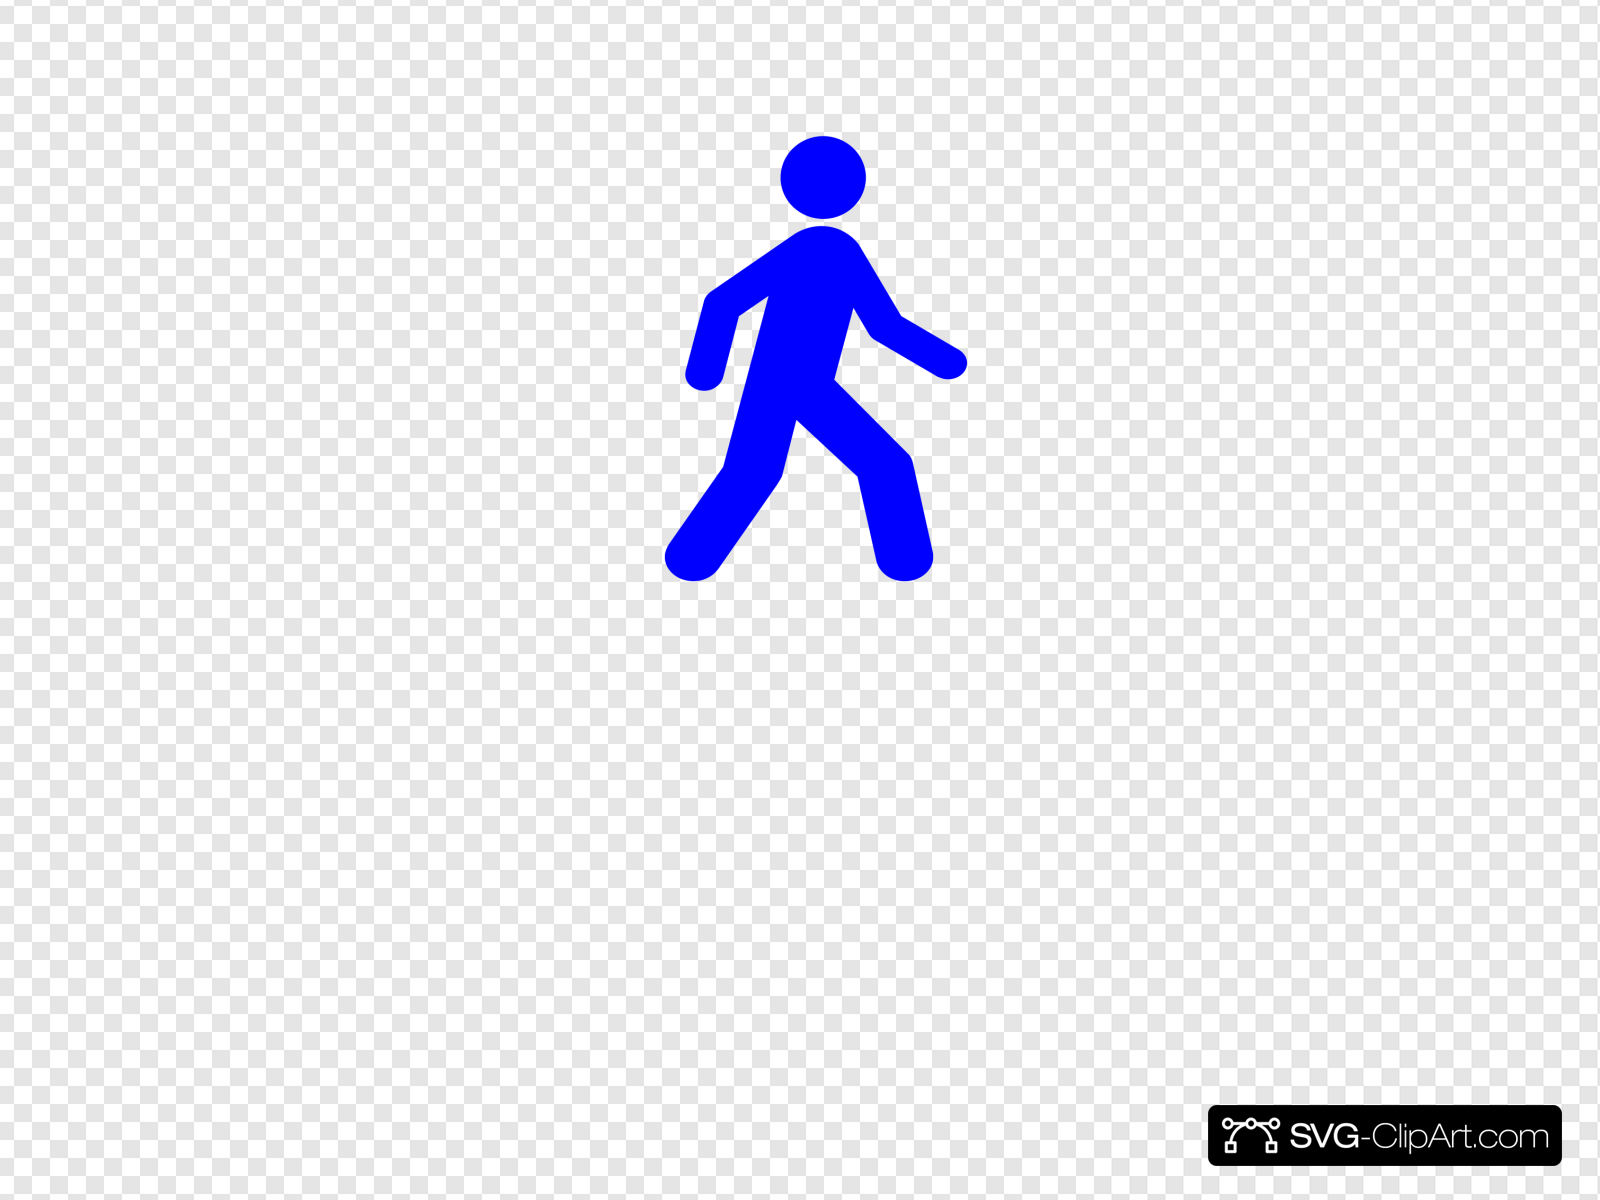 Walking Man Blue Clip art, Icon and SVG.